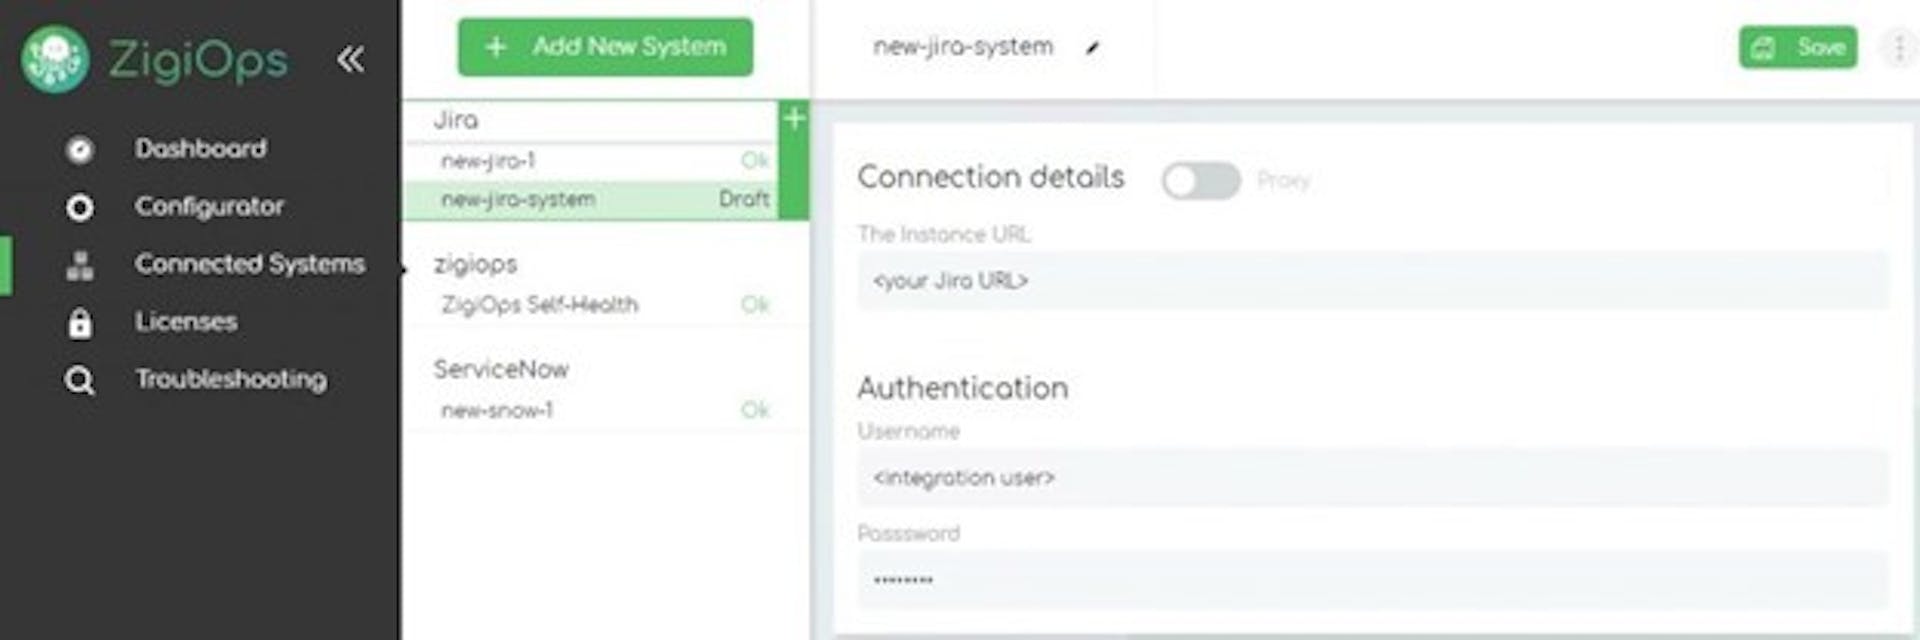 Connecting Jira with ZigiOps